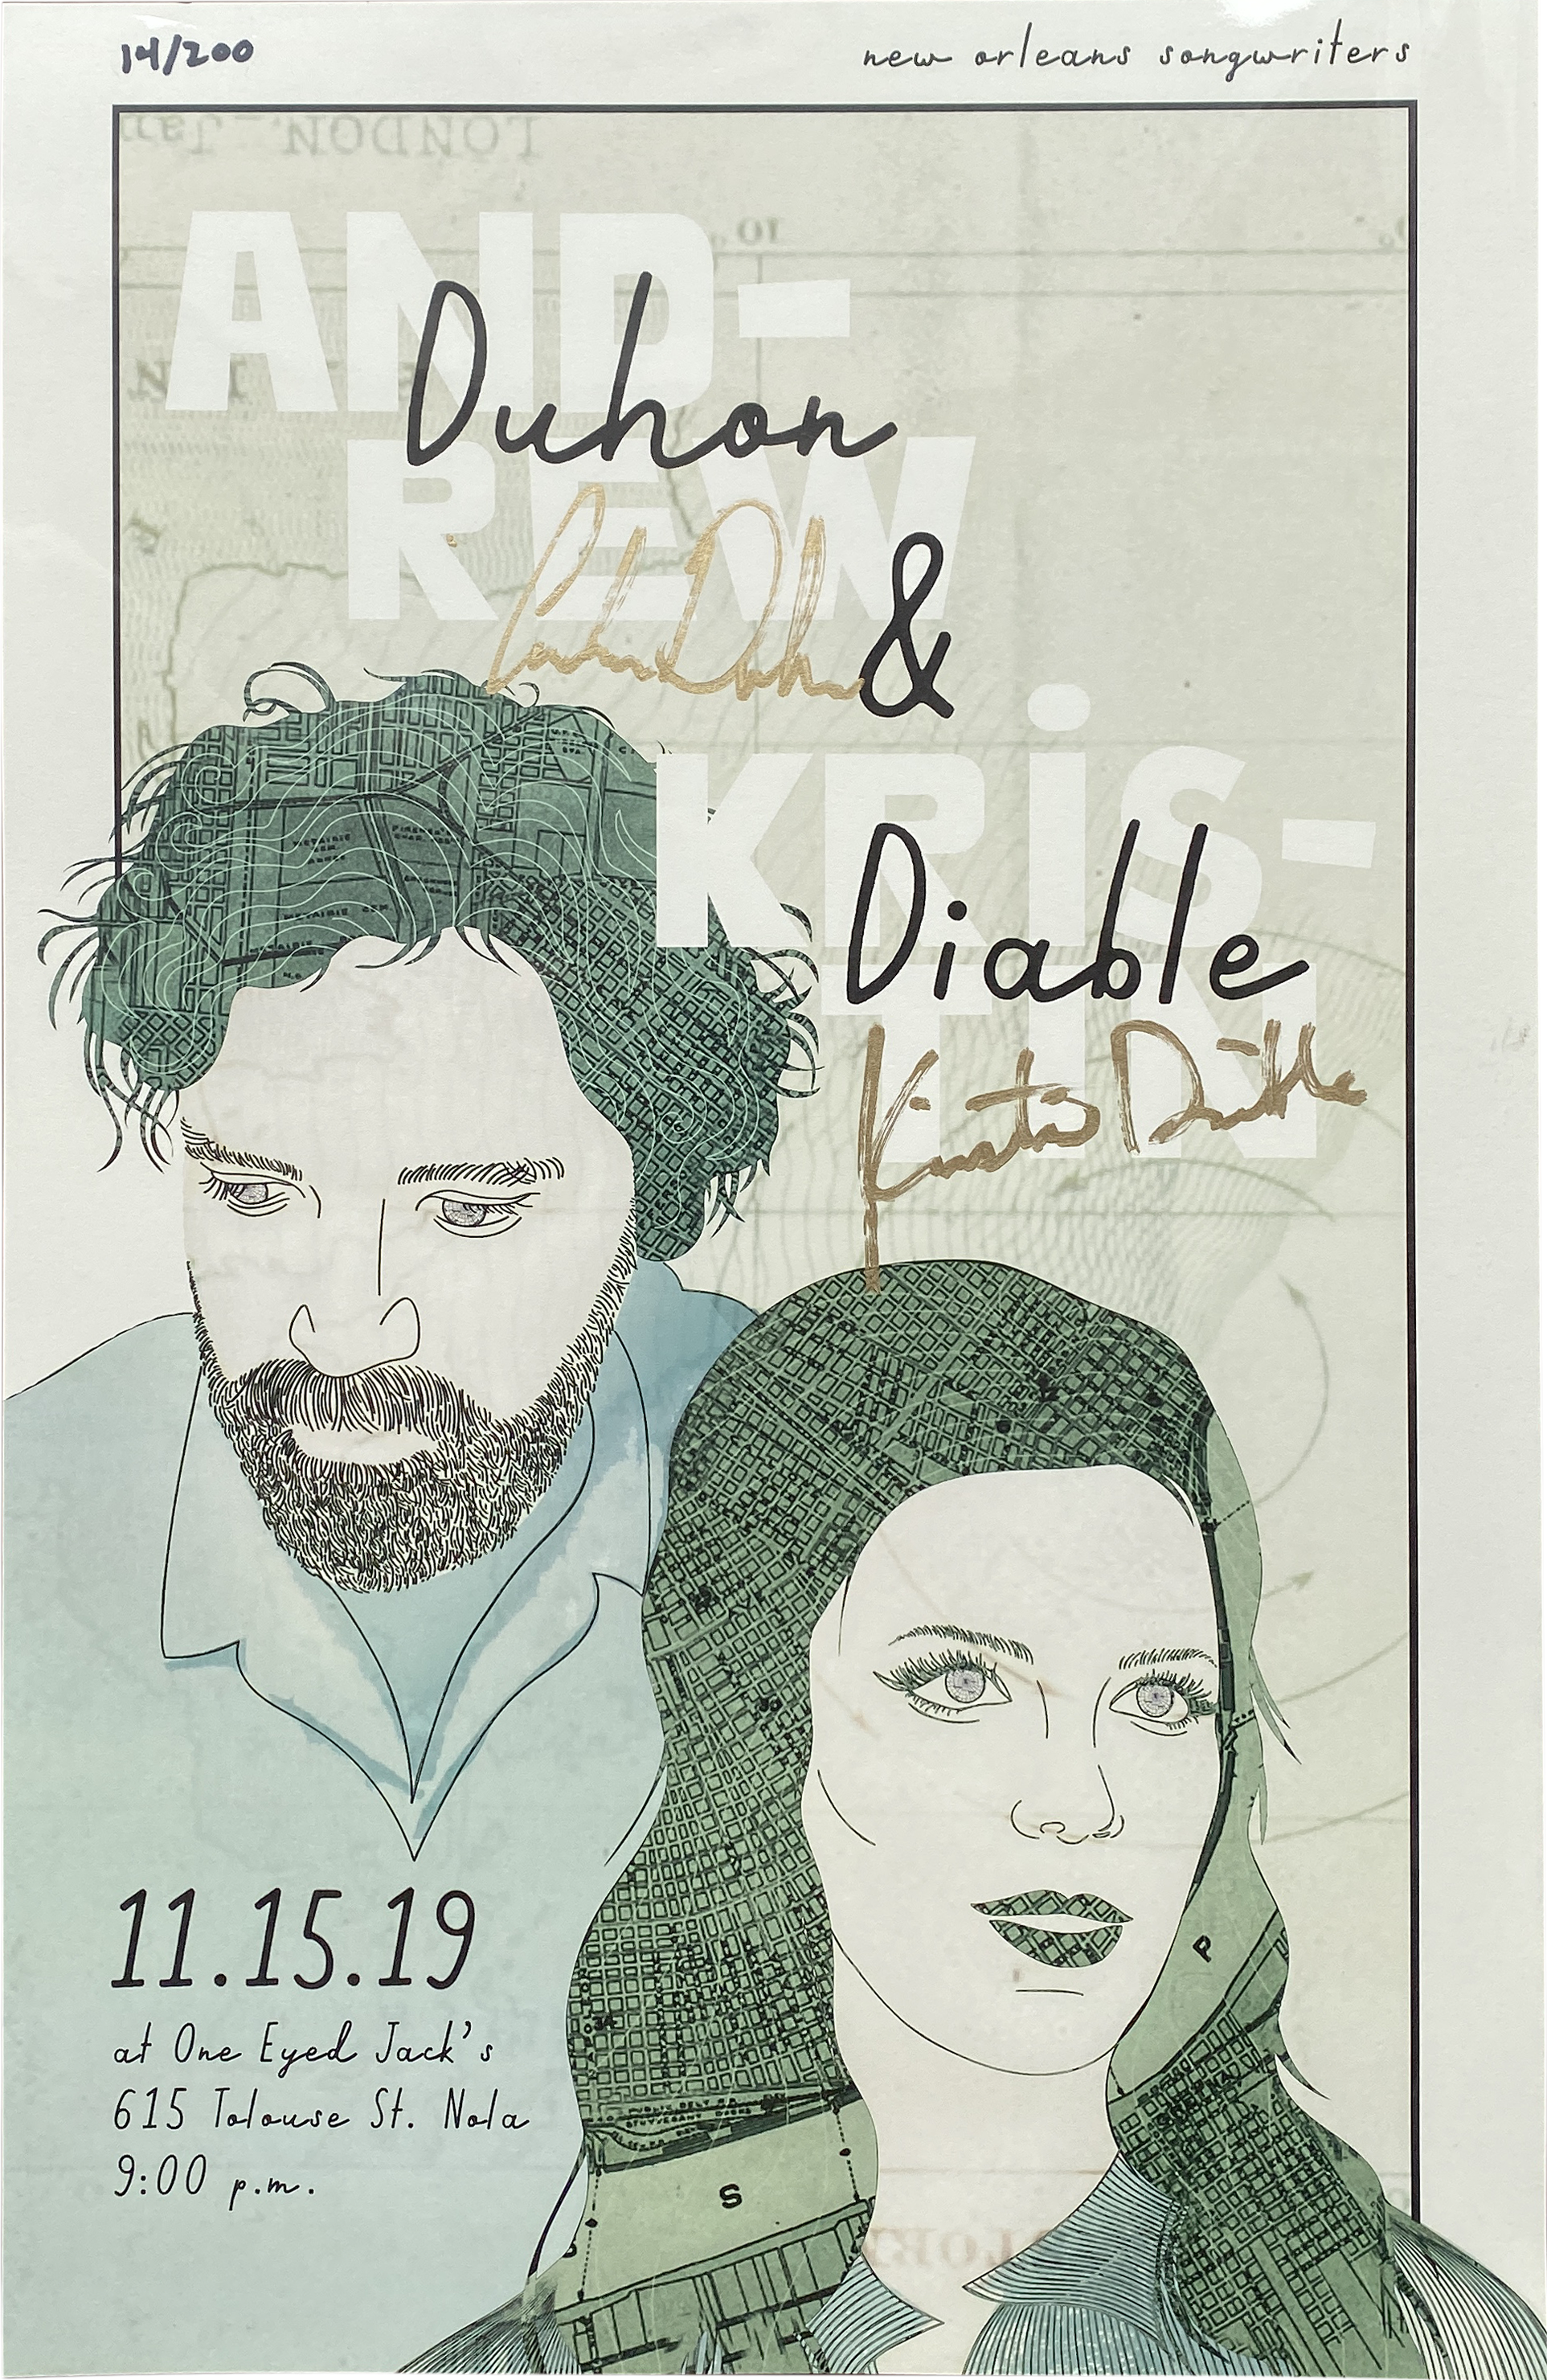 Signed One Eyed Jack's with Kristin Diable Show Poster - 11/15/19